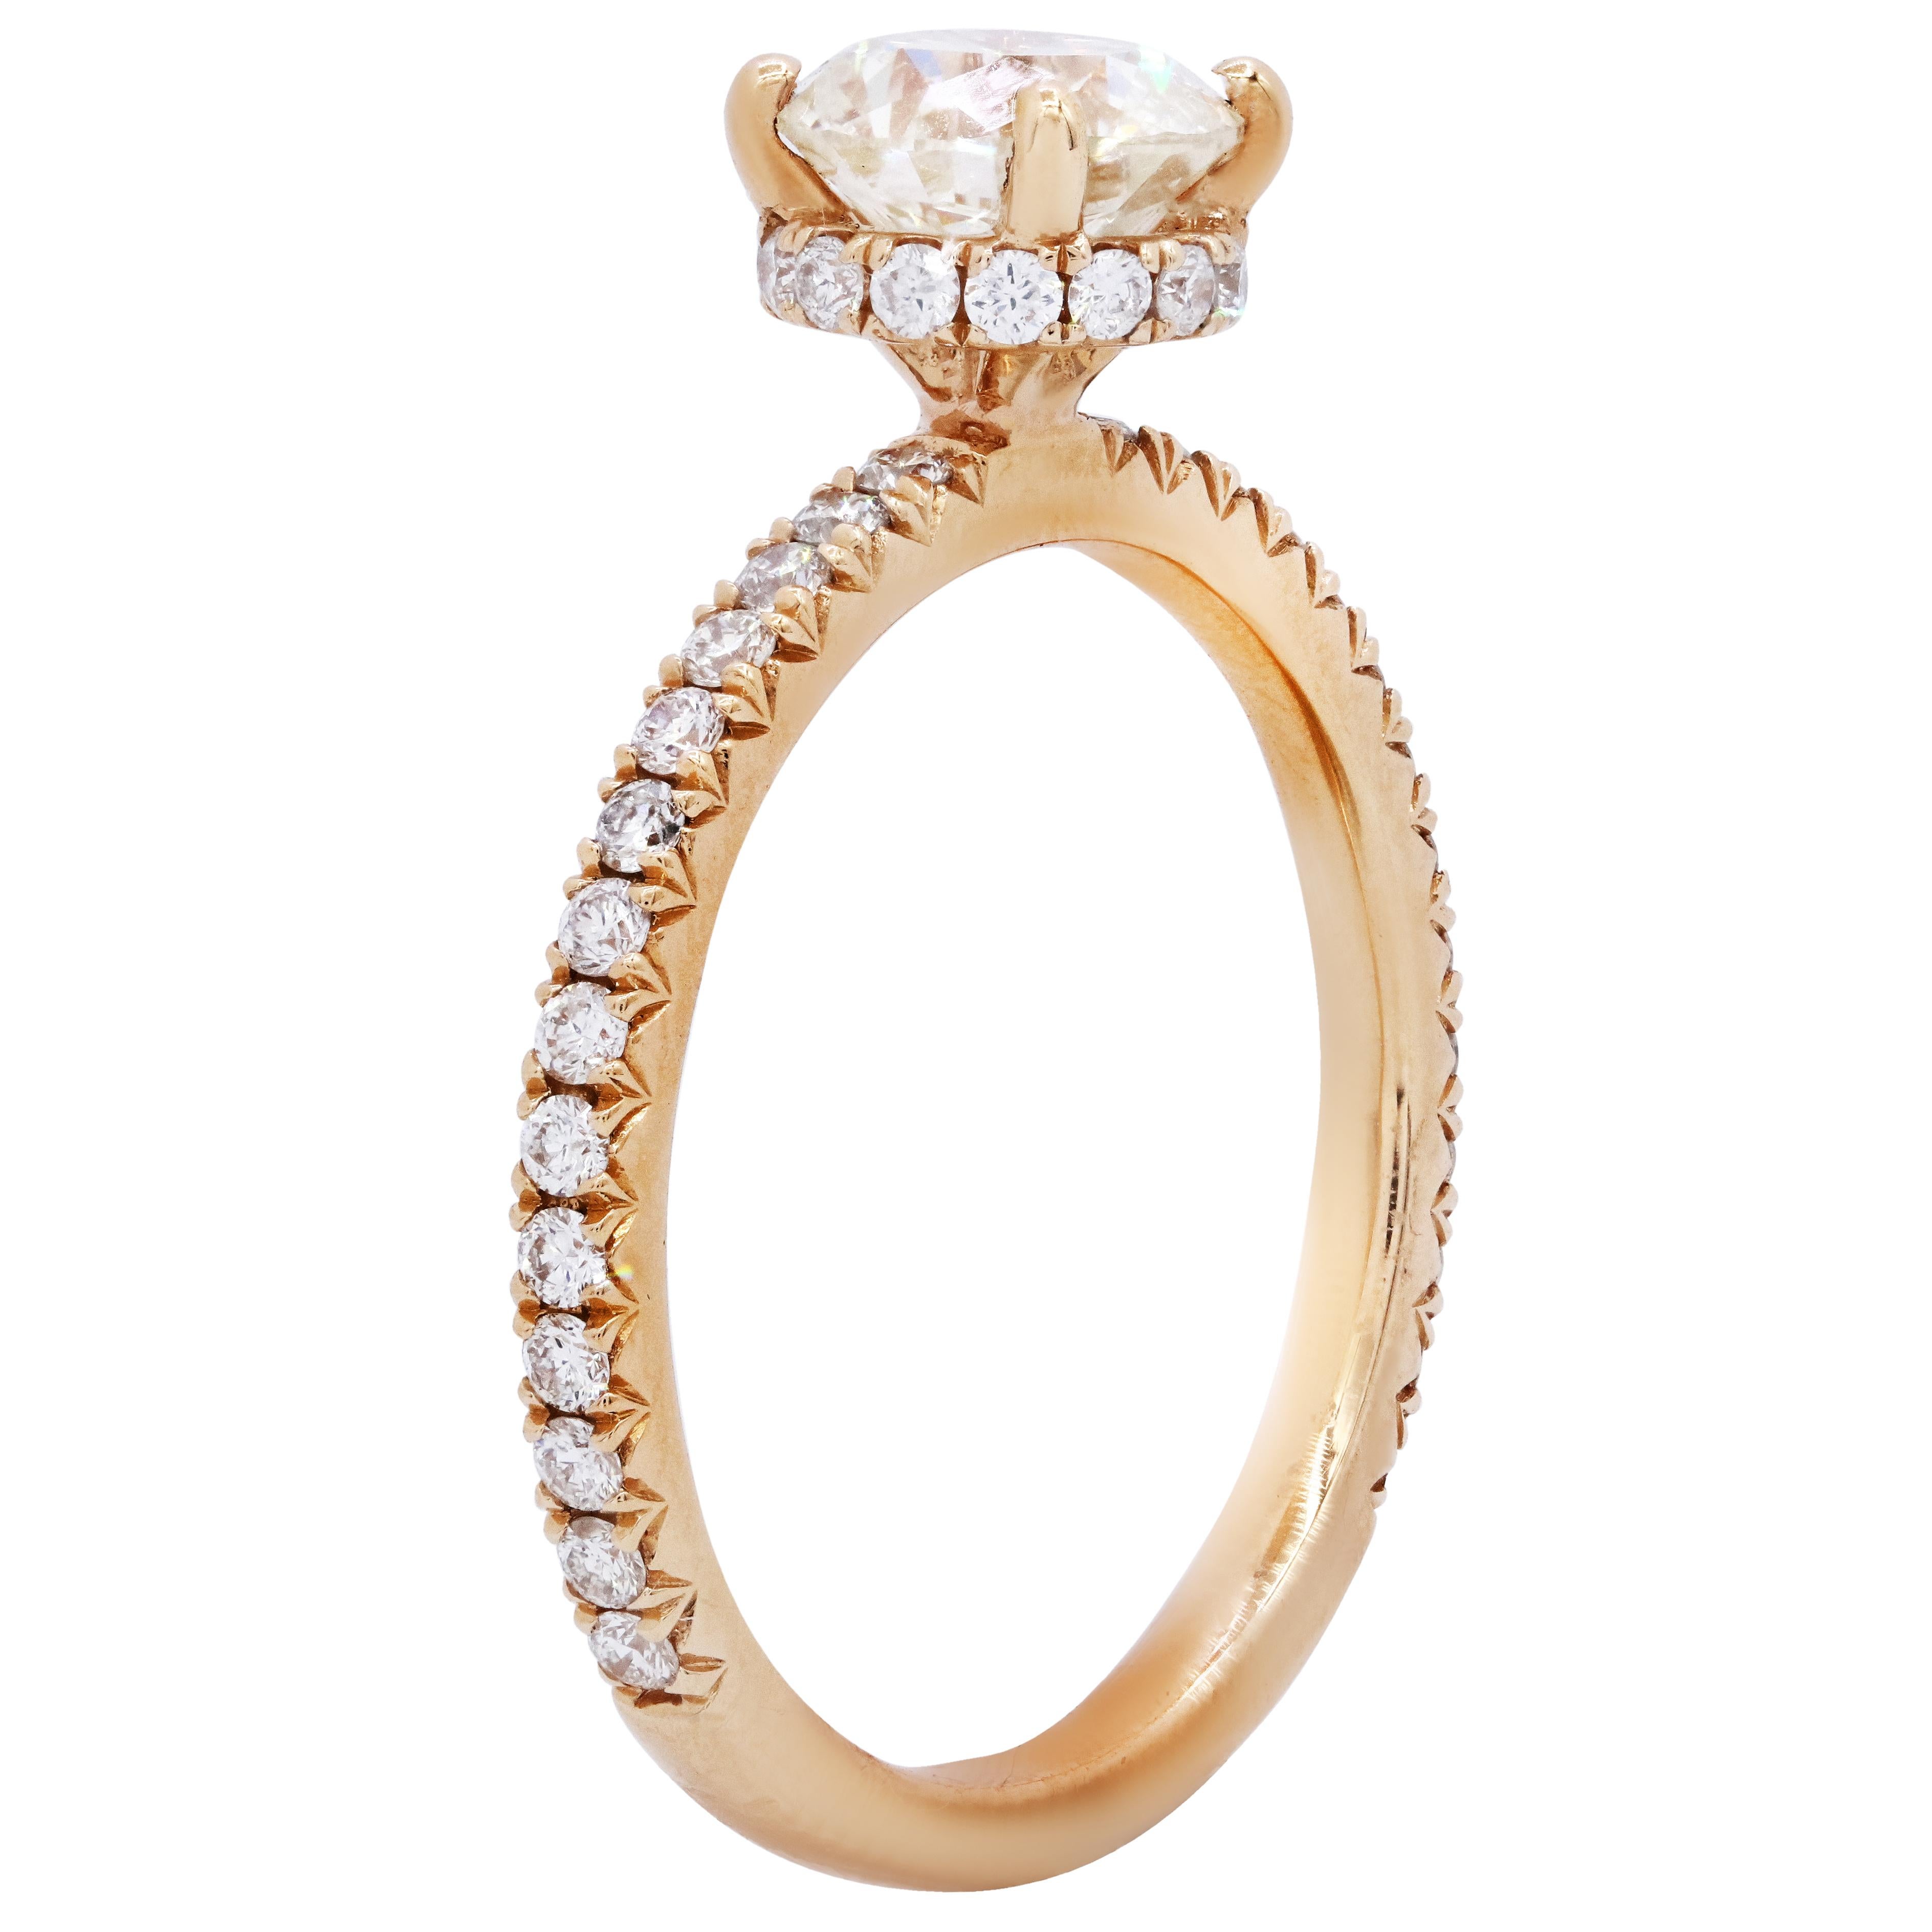 18 karat rose gold diamond ring features 1.20carat round cut diamond in the center and surrounded by 0.50ct diamonds on the side 
